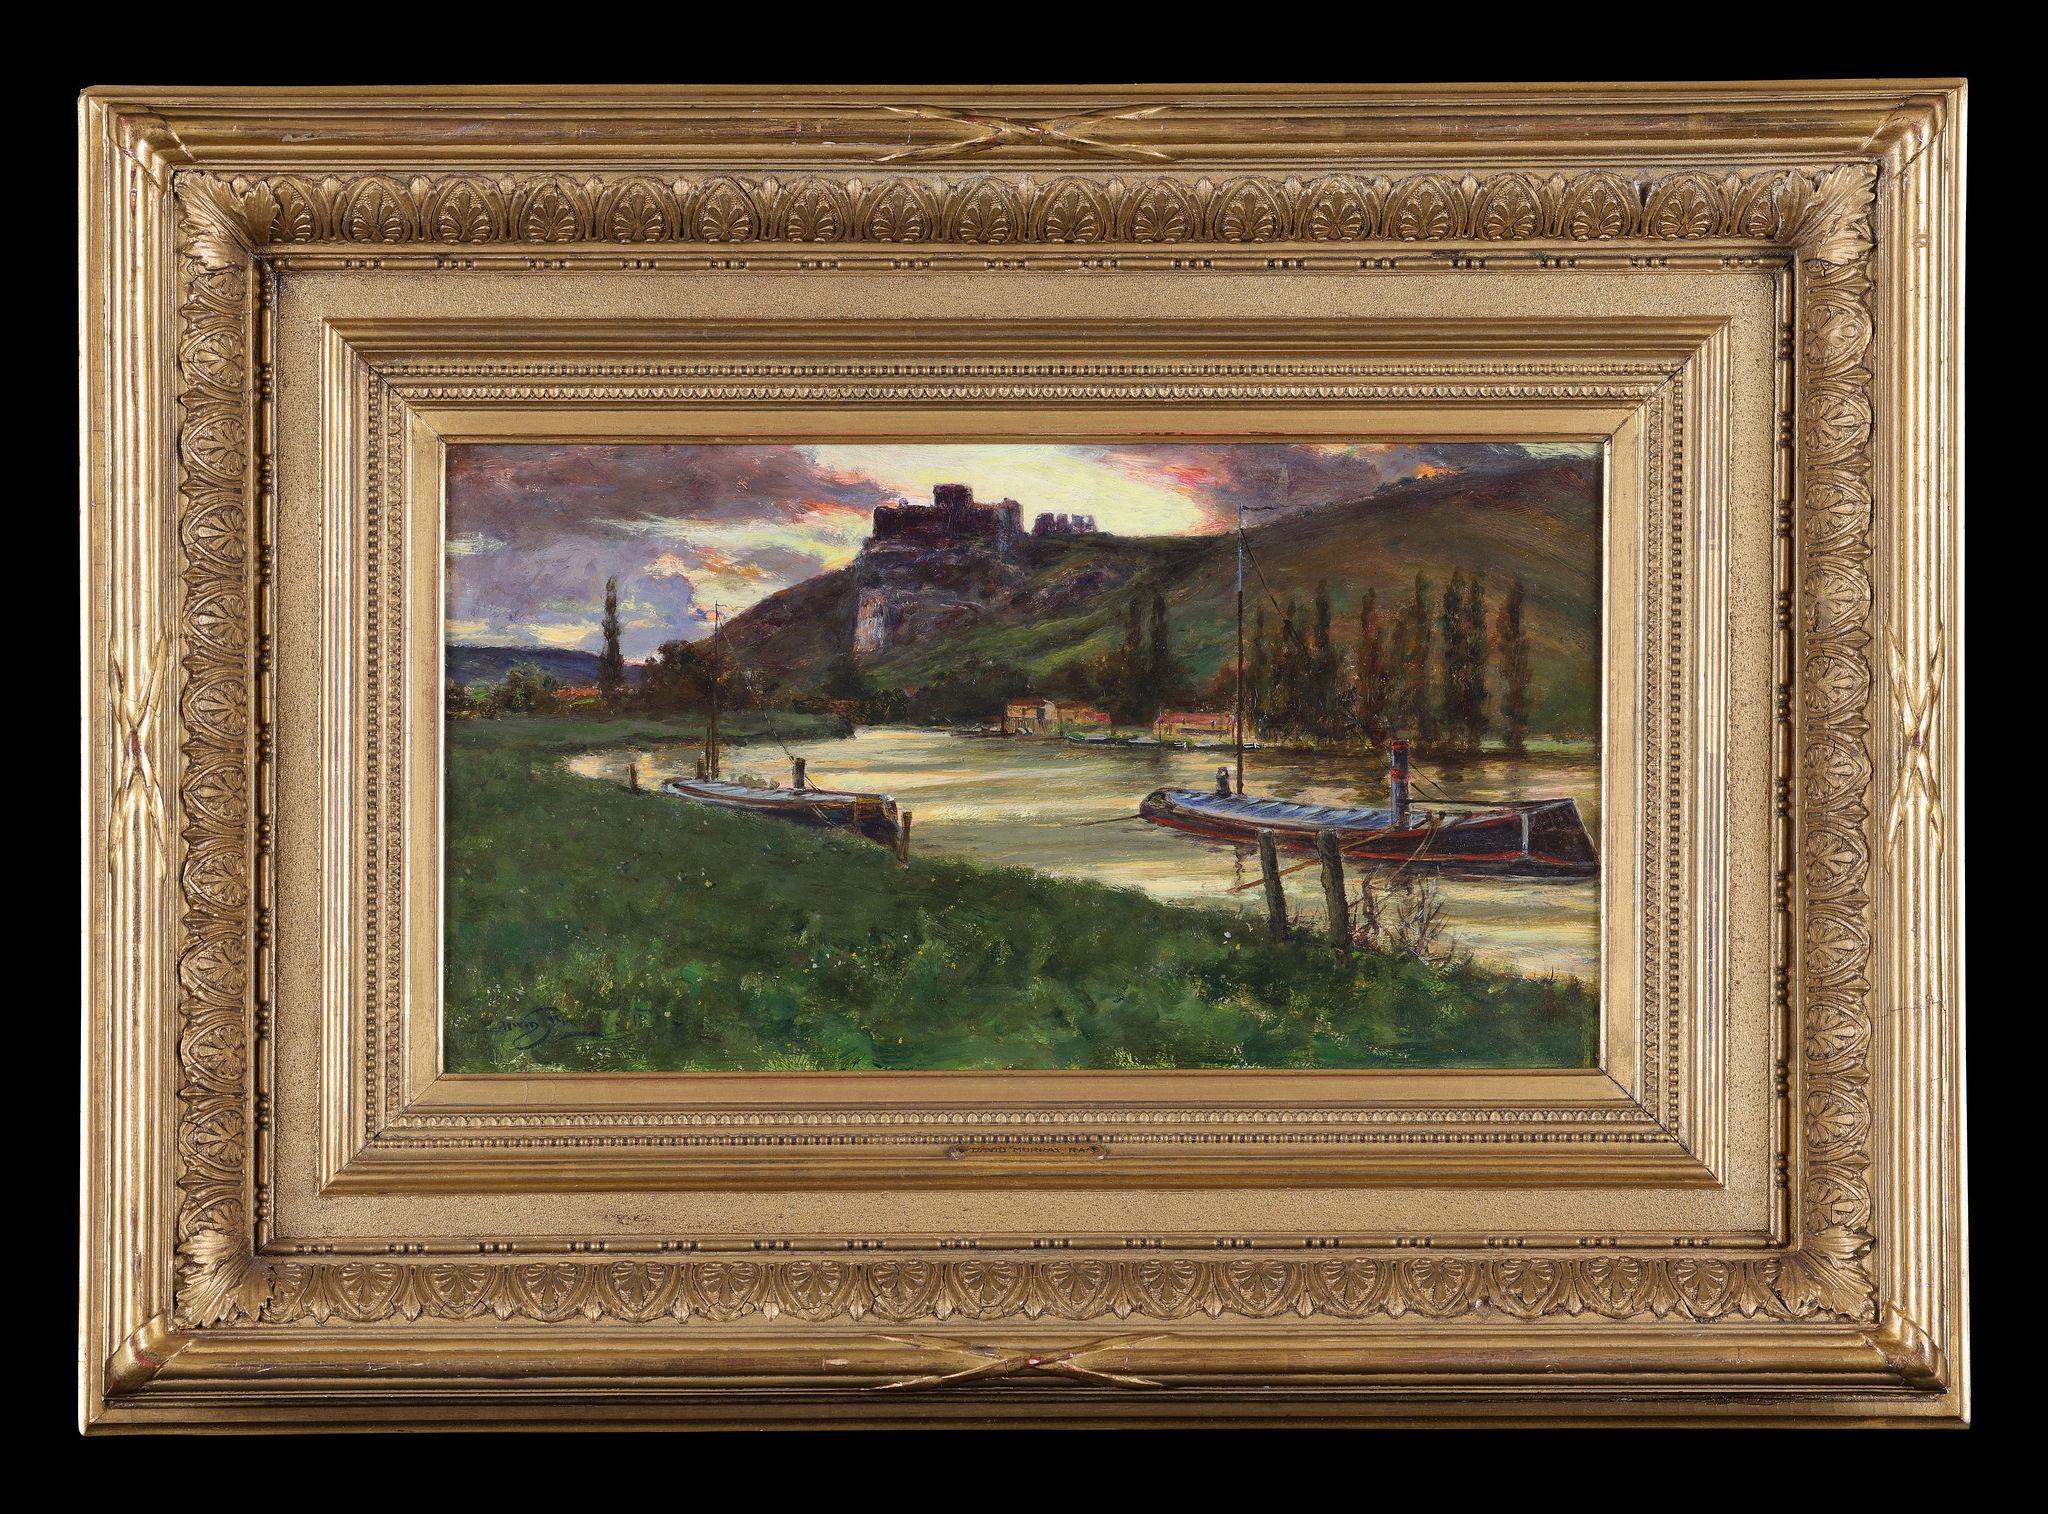 Sir David Murray Landscape Painting - Barges on a River 